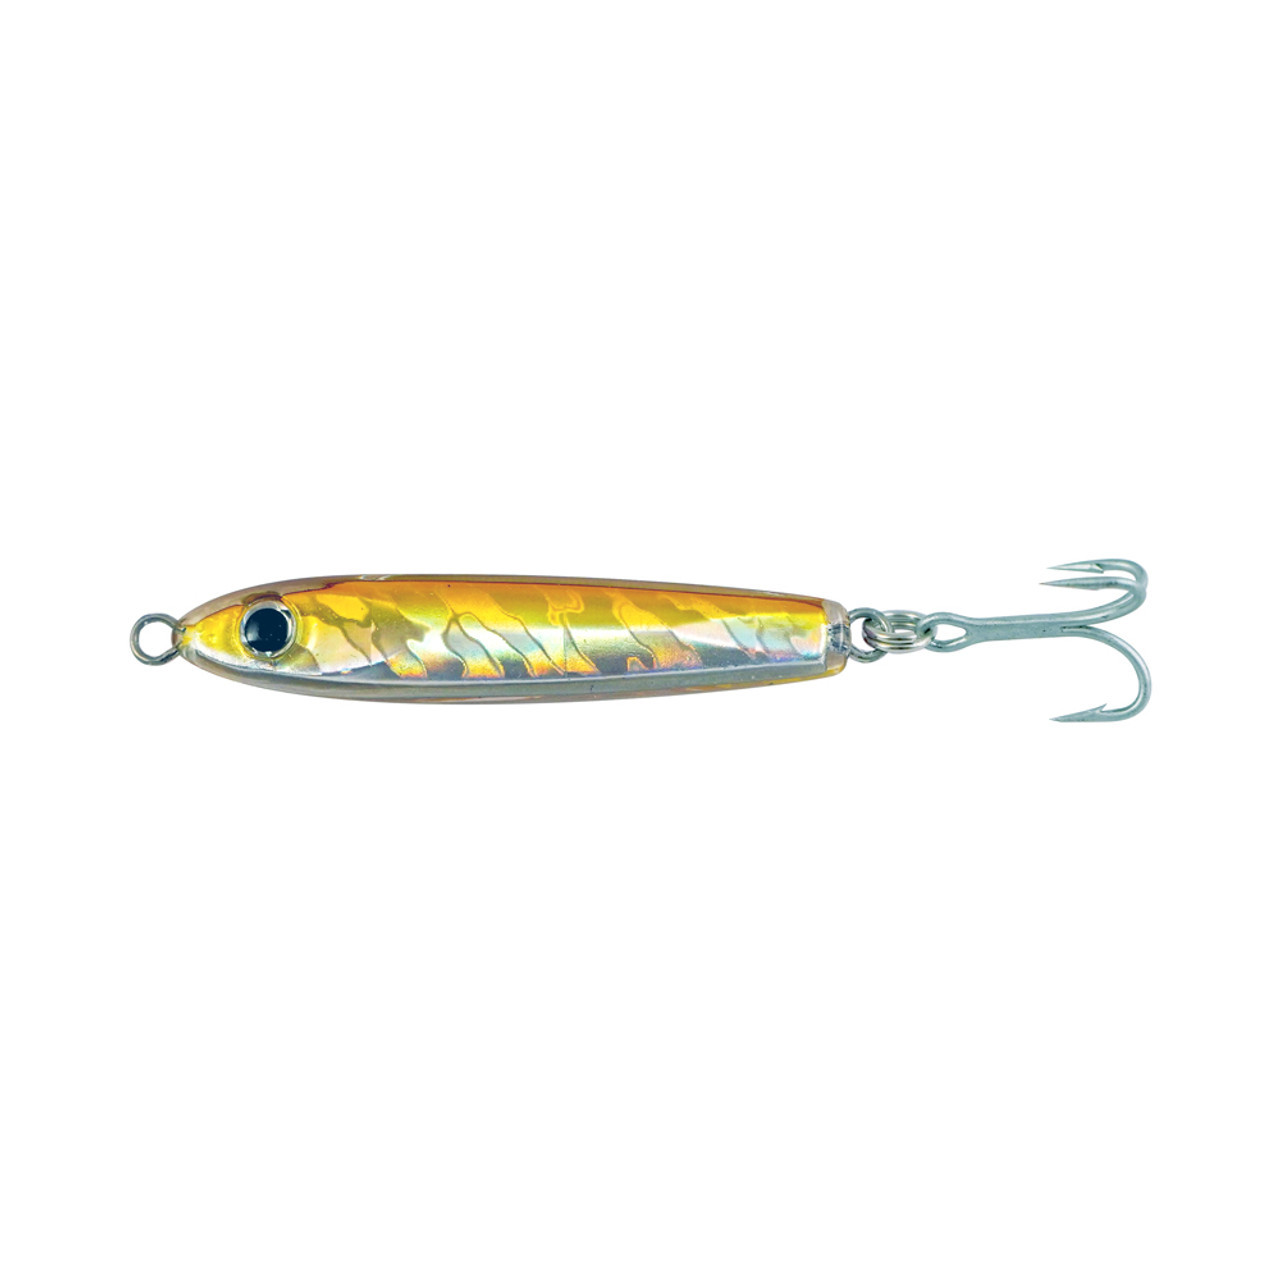 Game On! EXO Jig 1.5oz - Electric Blue